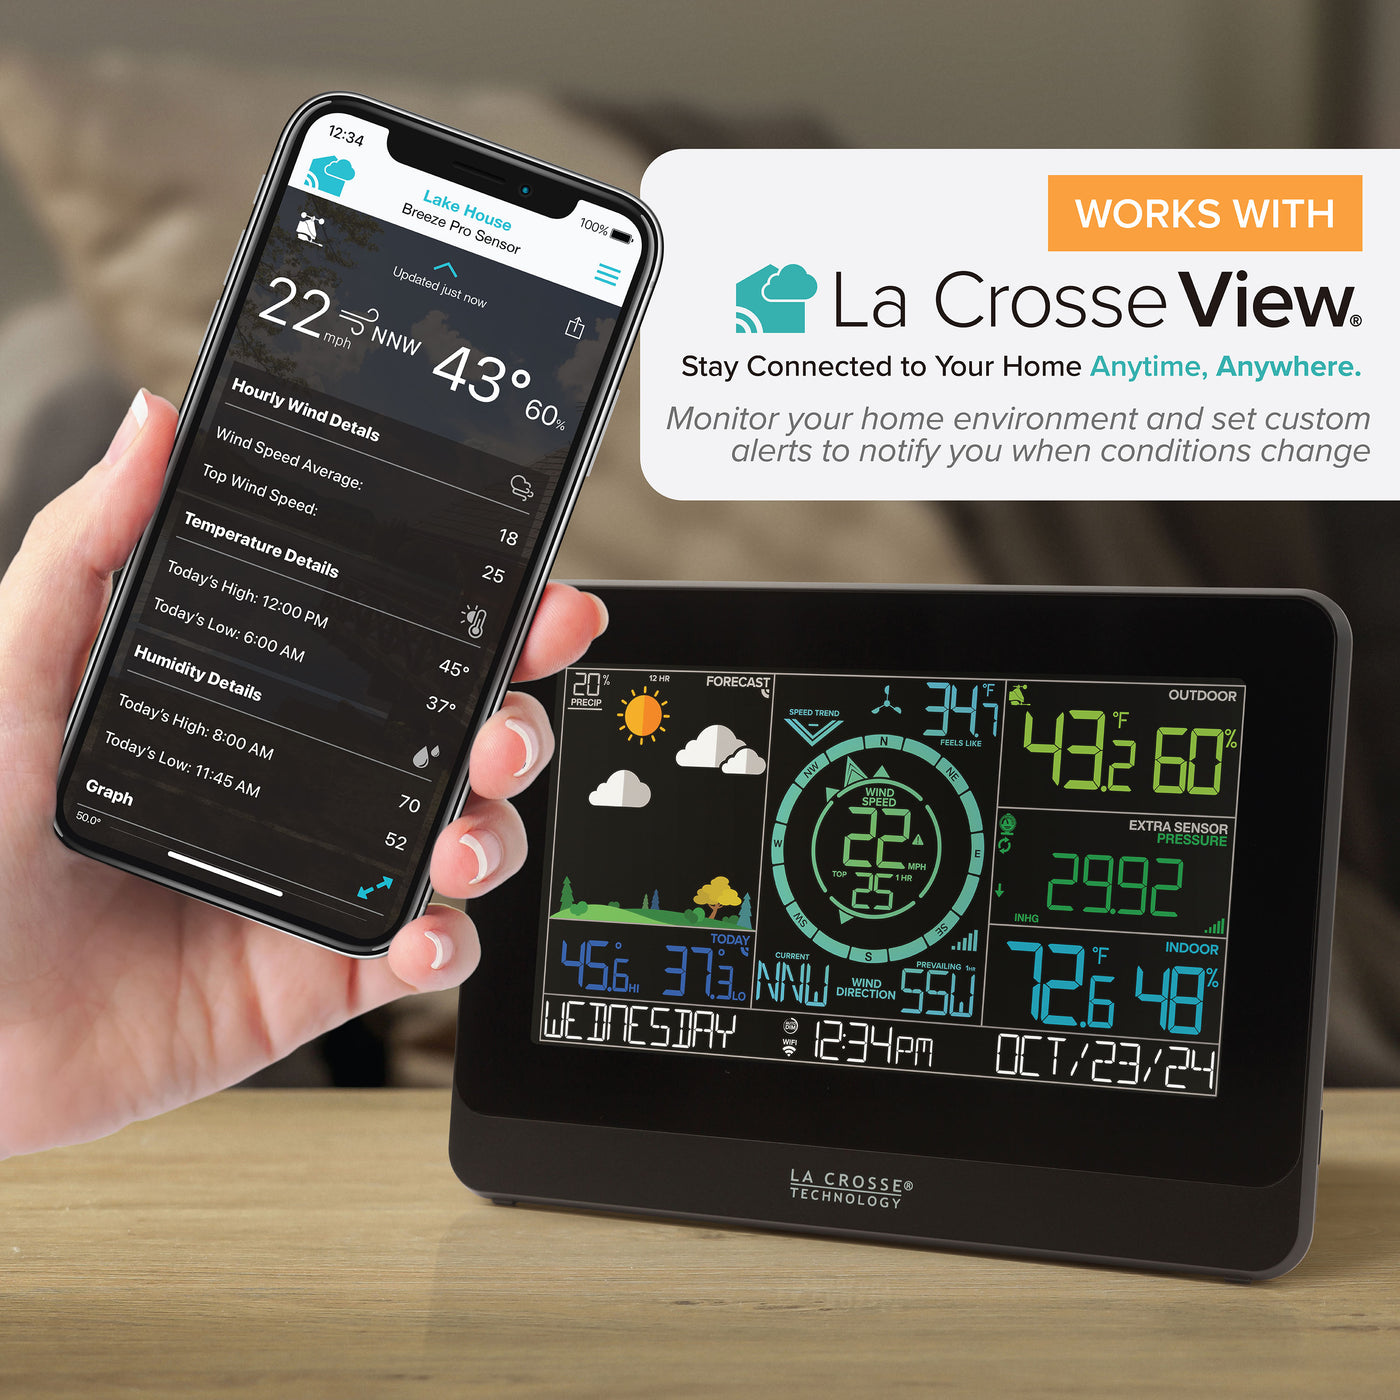 V50 works with La Crosse View